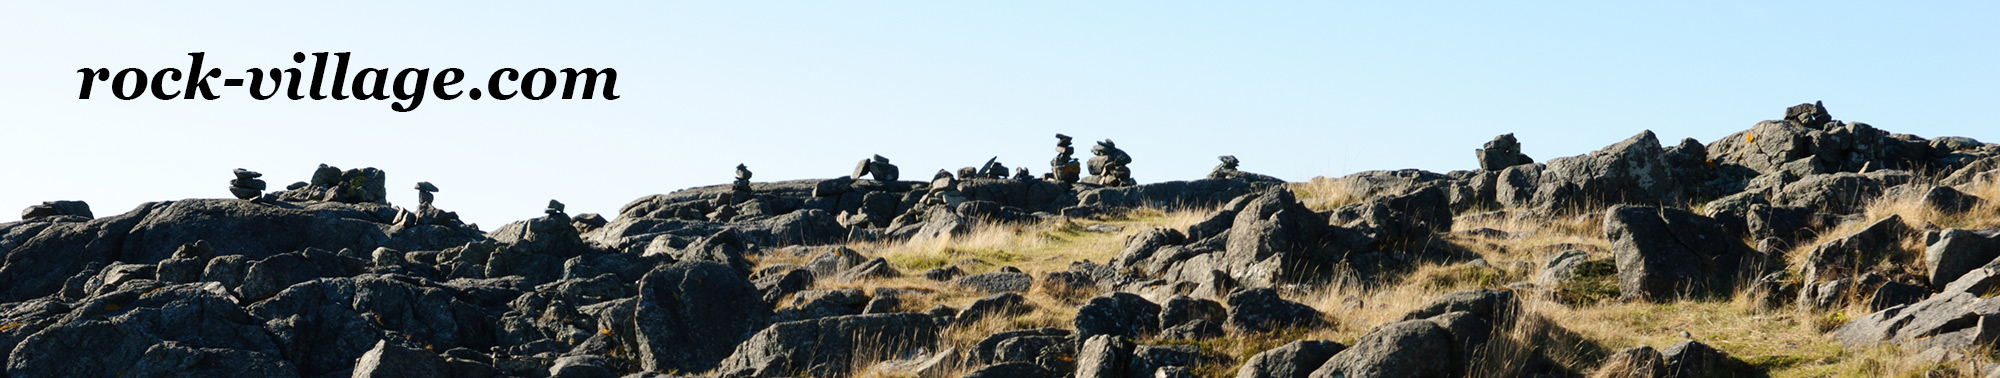 Rock Village Website banner picture, a rocky area with cairns